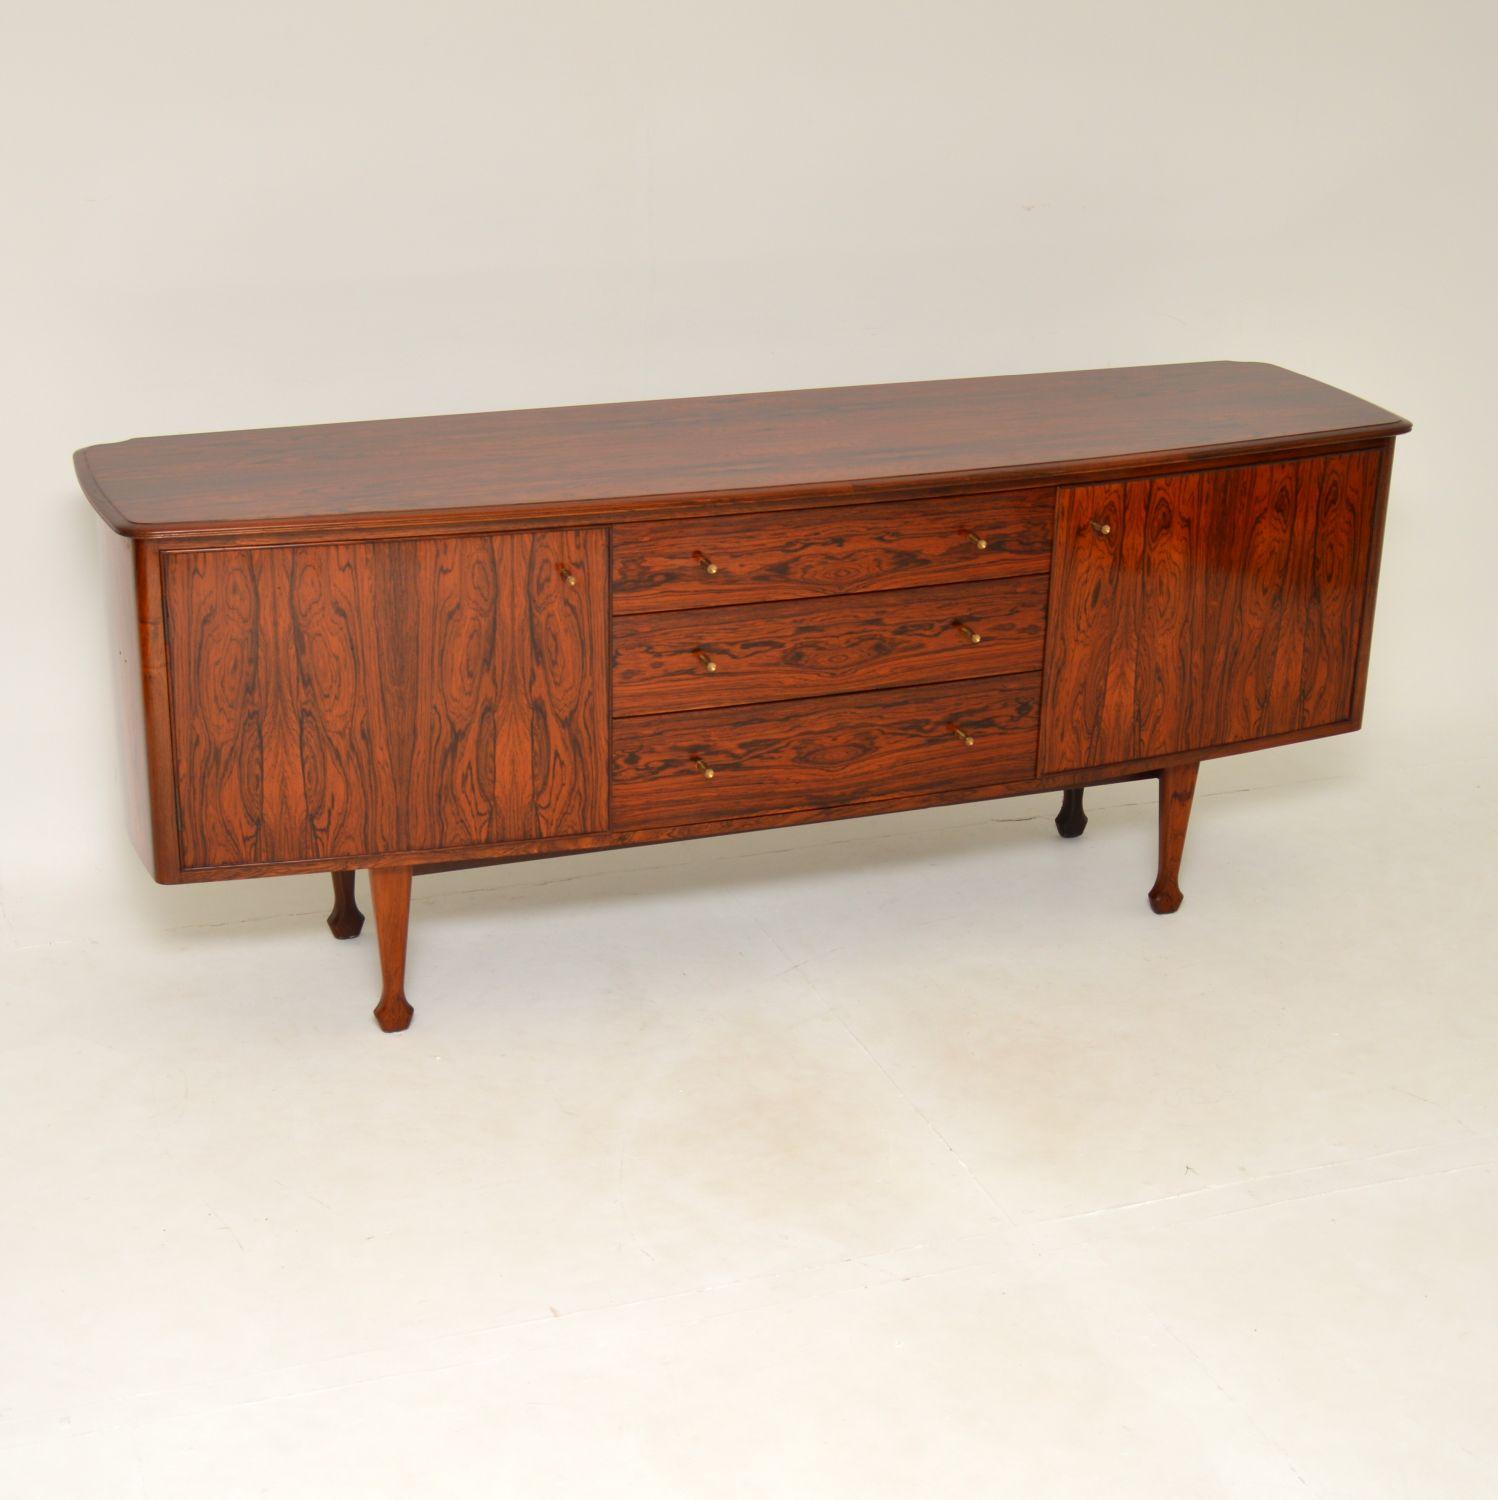 English 1950's Vintage Sideboard by a.J Milne for Heal's